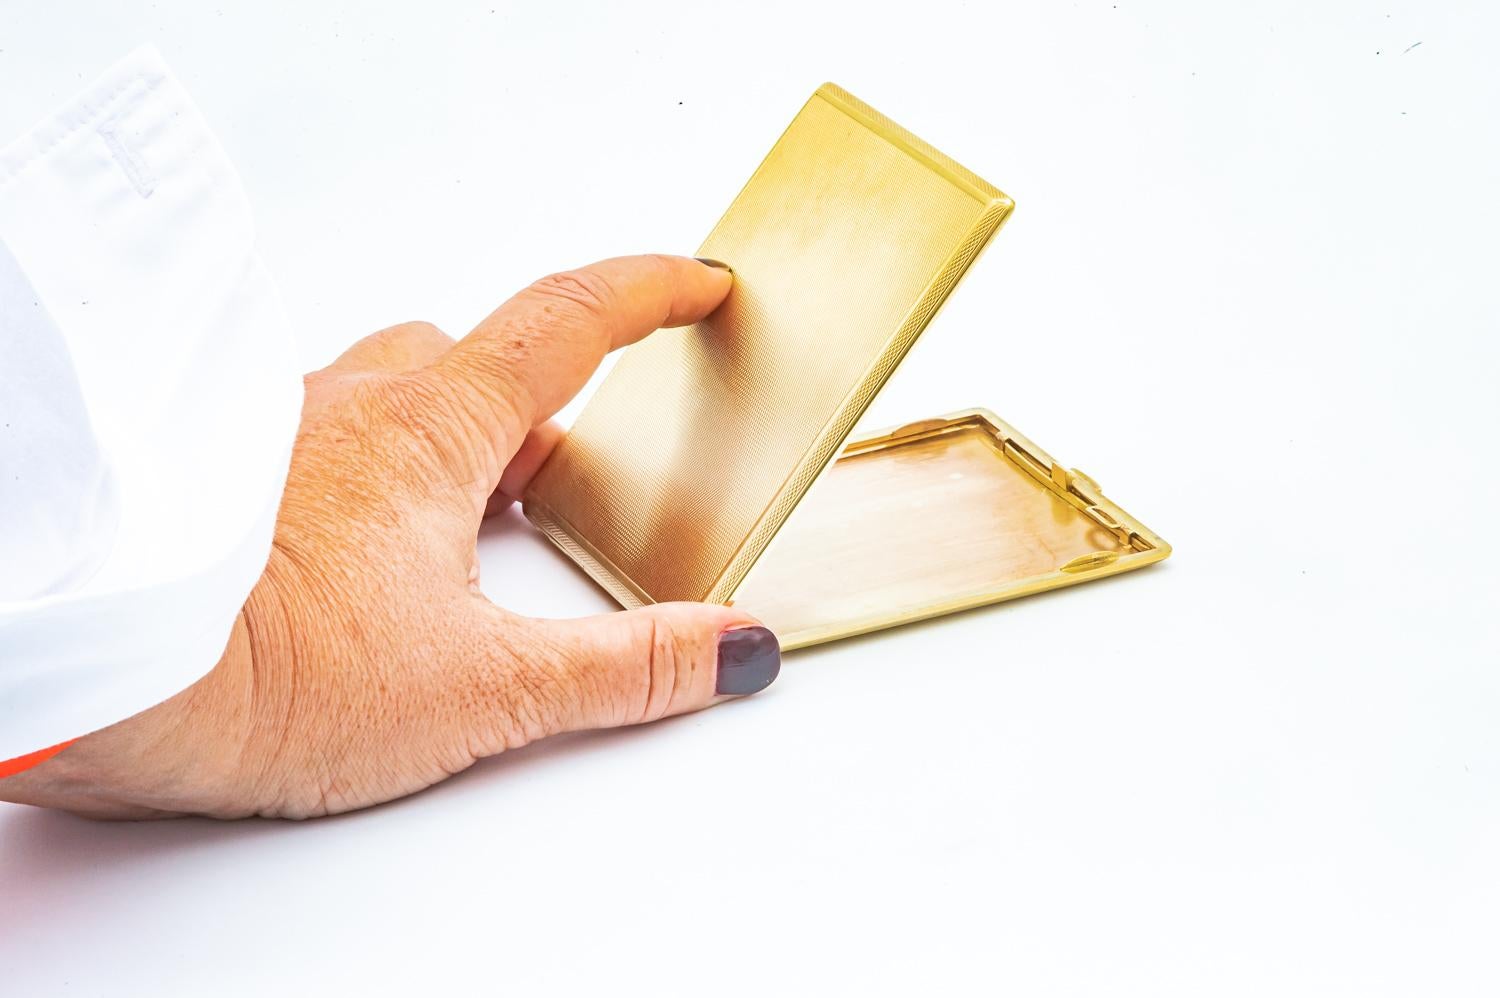 Discover our 14-carat yellow gold cigarette case, an exceptional piece that combines elegance, refinement and historical heritage.

This cigarette case is a true work of art, with a fine carving on the top that adds a touch of sophistication and